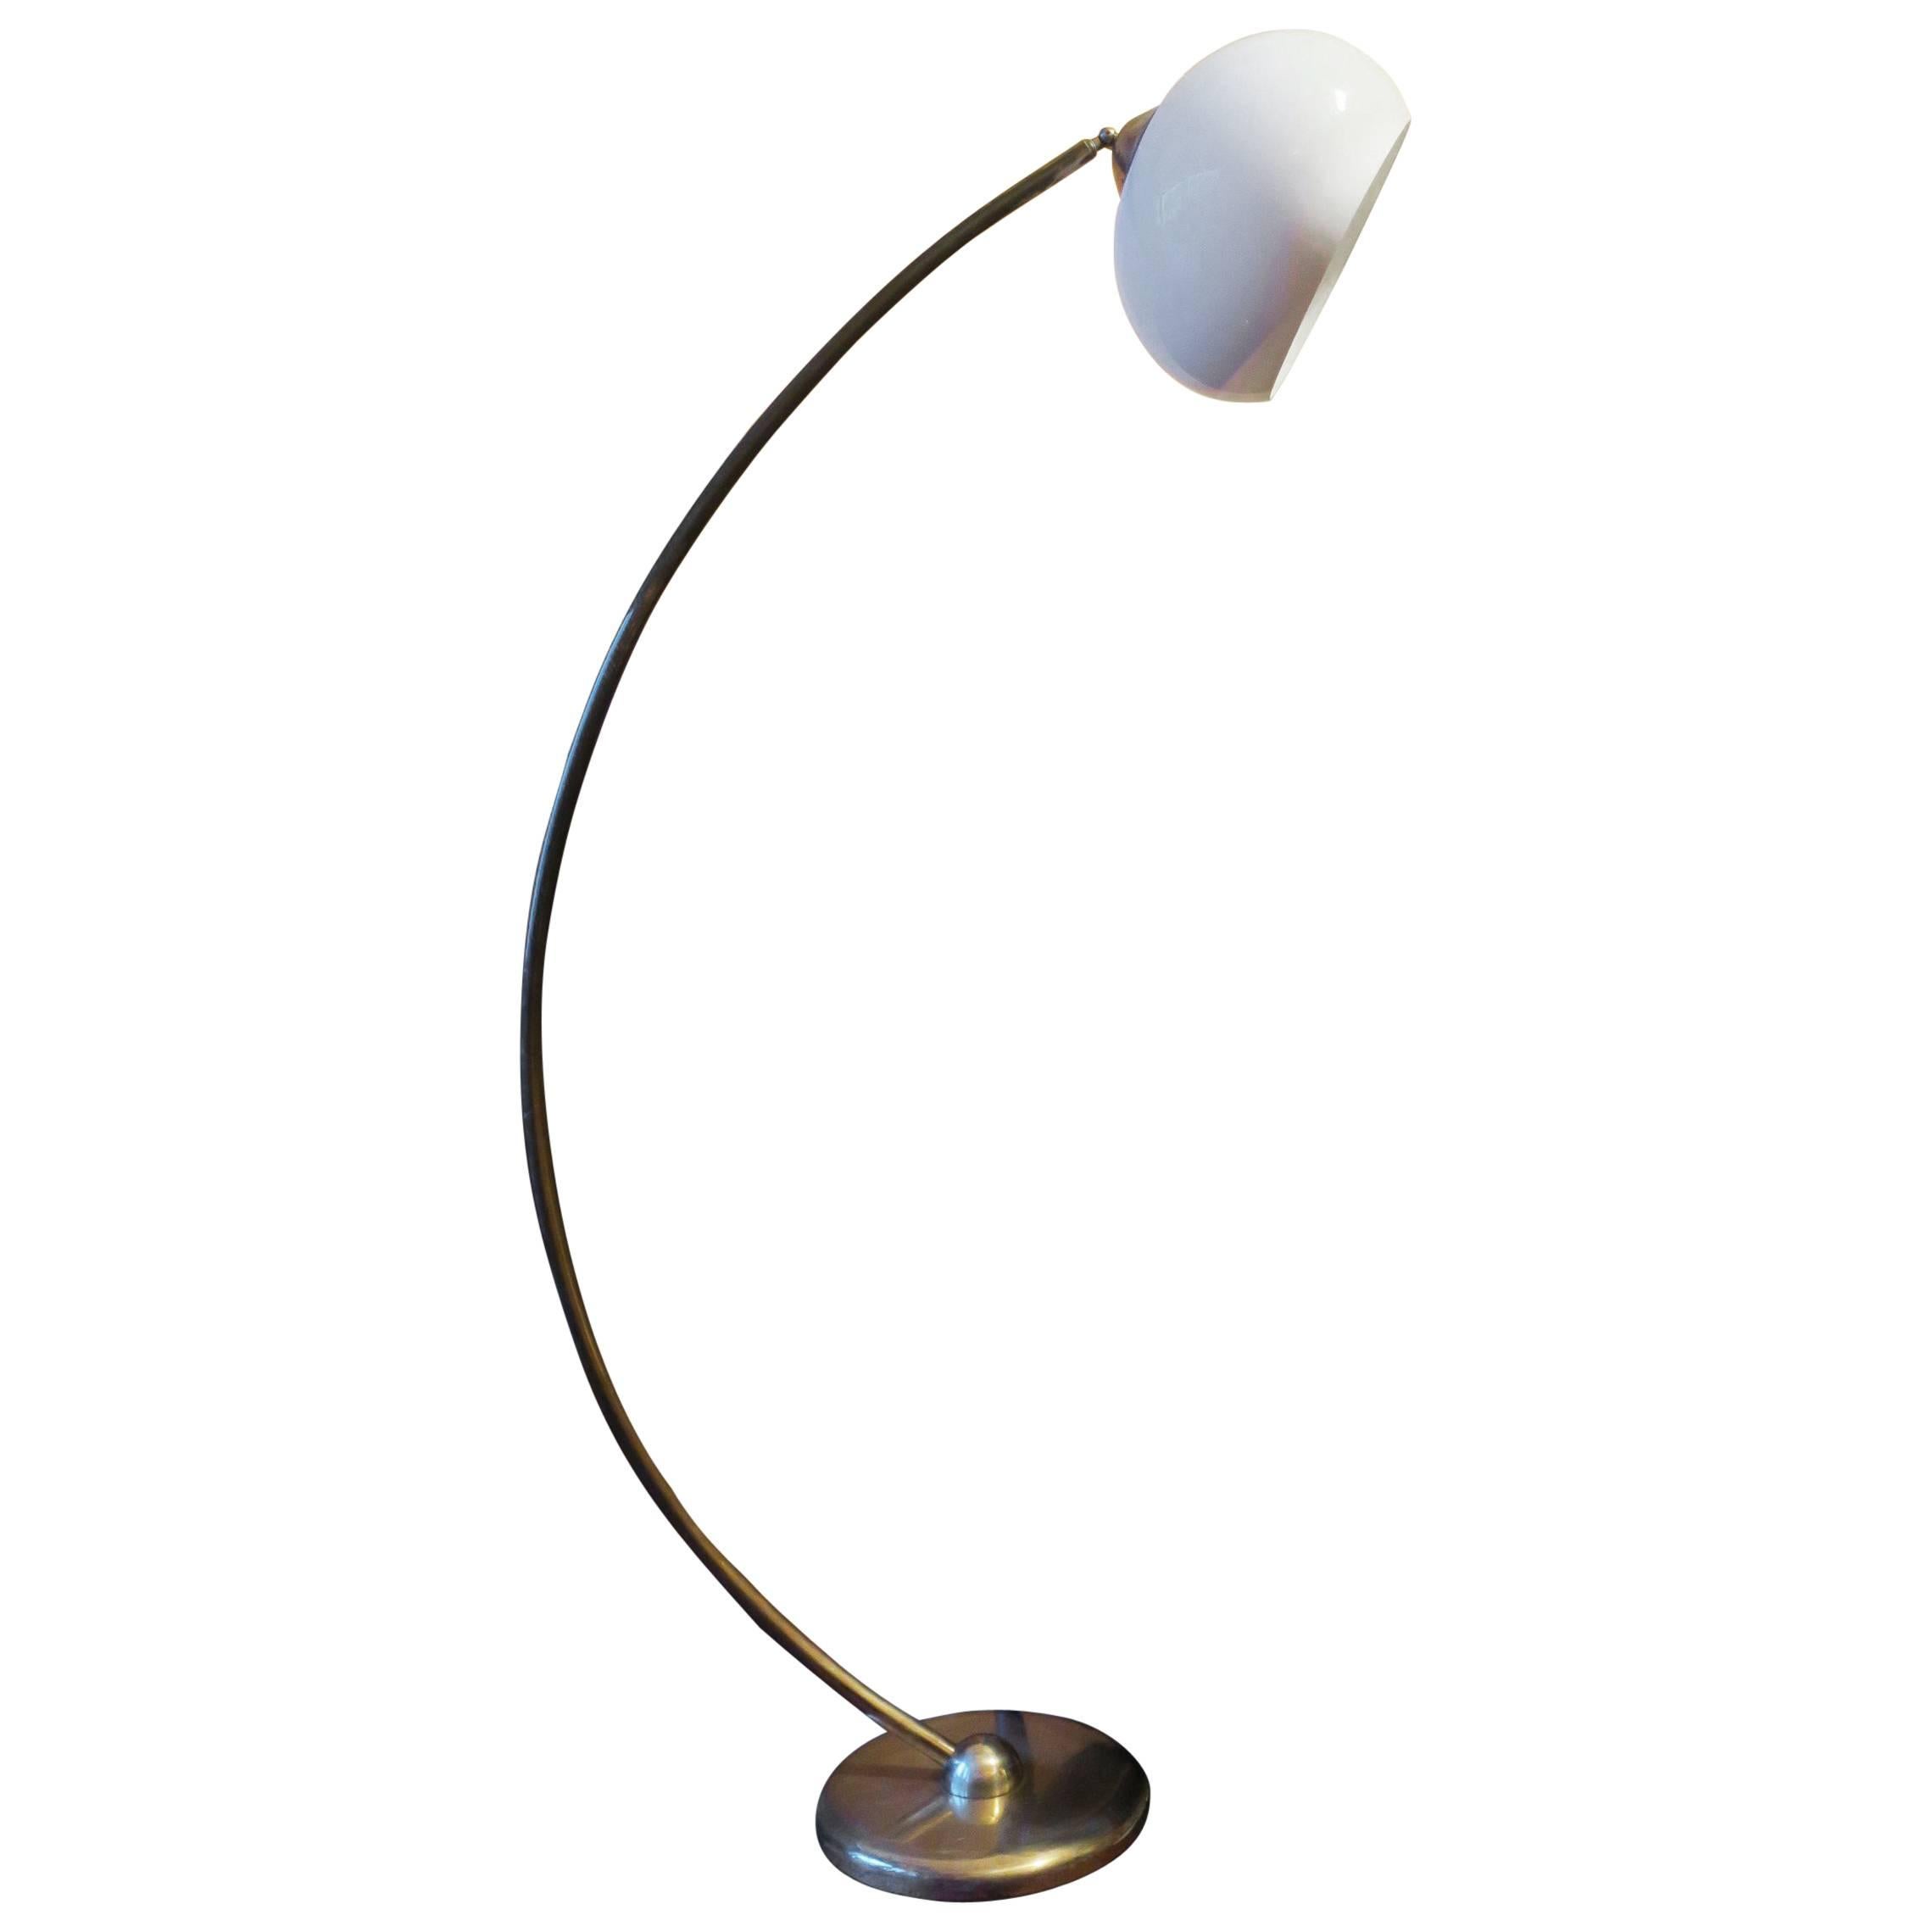 Röhm Brass and Lucite Arc Floor Lamp Adjustable, 1950s For Sale